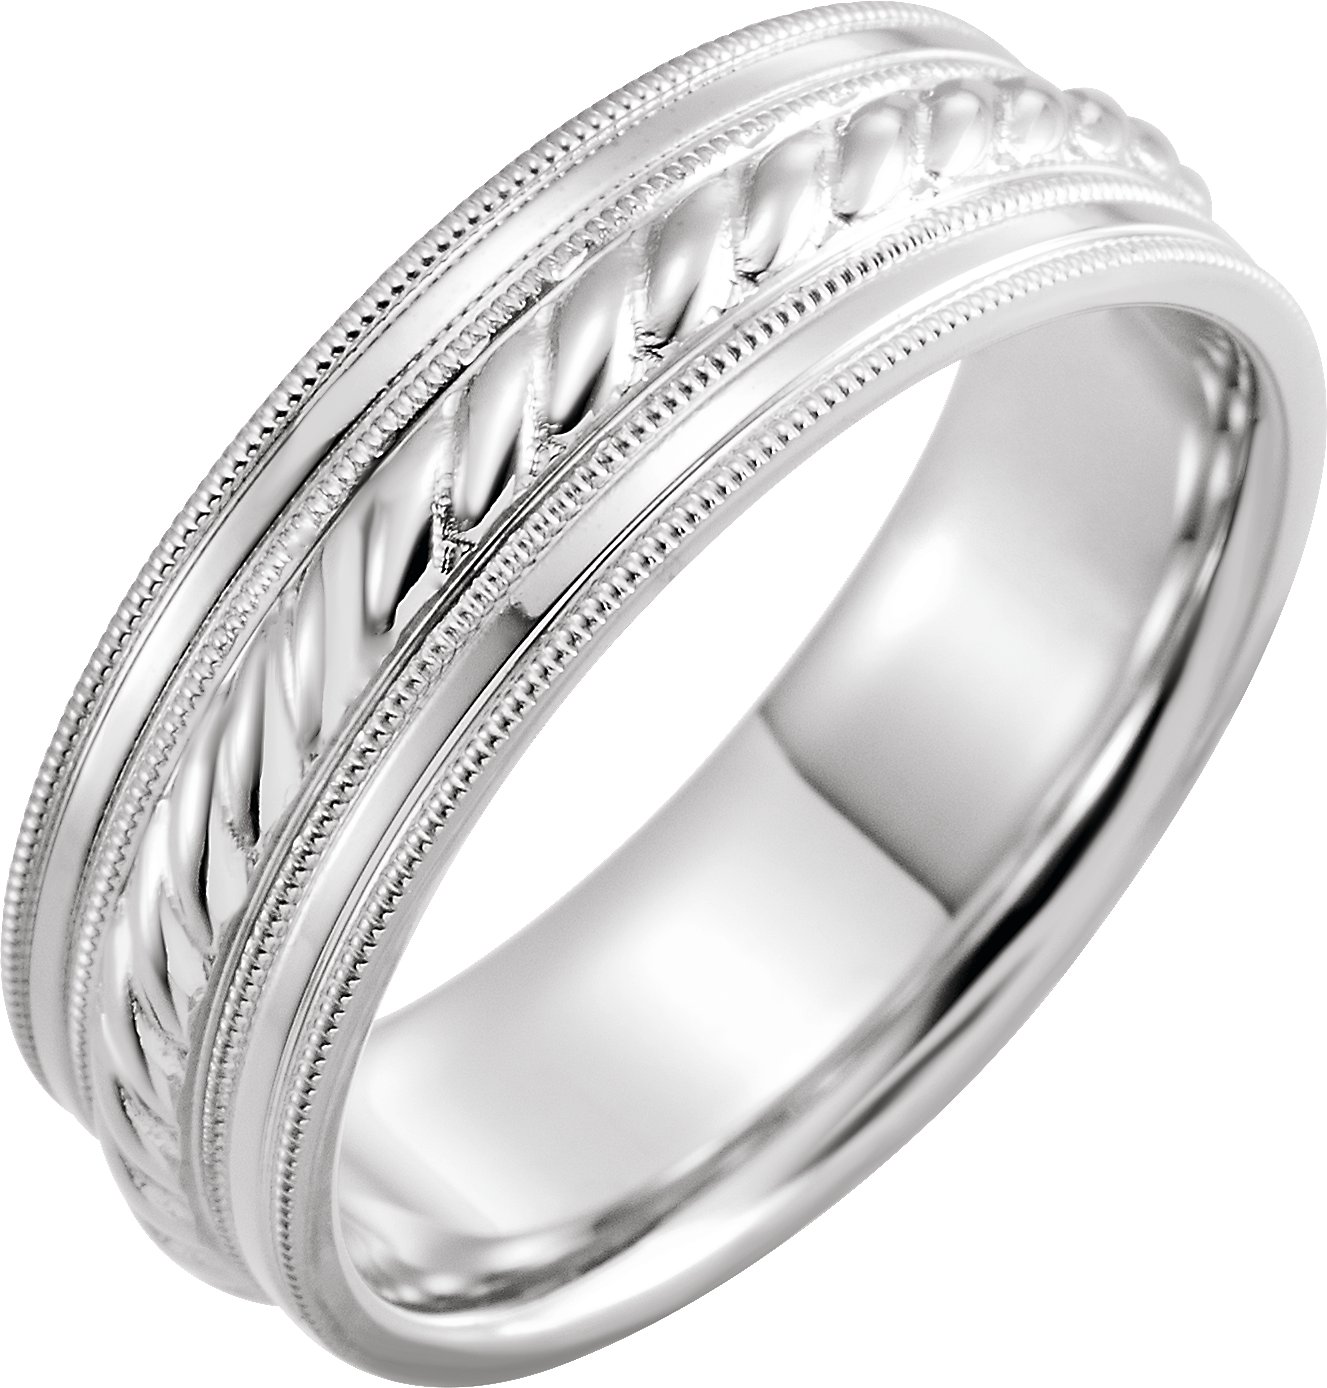 14K White 7 mm Rope Pattern Band with Milgrain Size 5.5 Ref 16526109